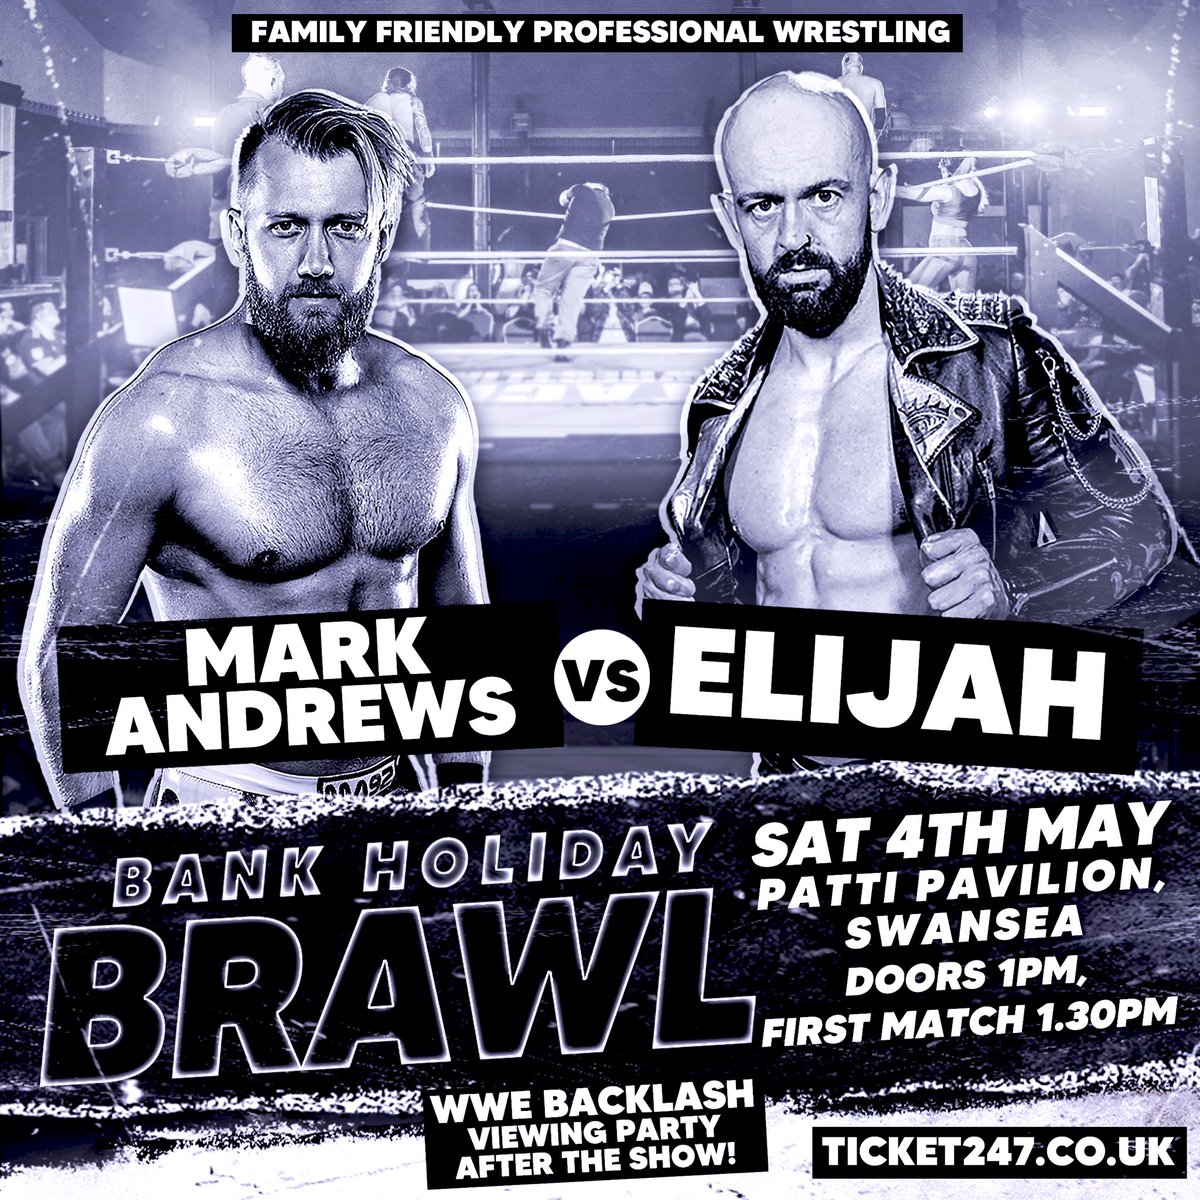 On May 4th in Swansea I go one on one with @ELIJAHWrestler for the first time since 2017! Get tickets now! ⬇️ 🎟️ ticket247.co.uk/Event/bank-hol…